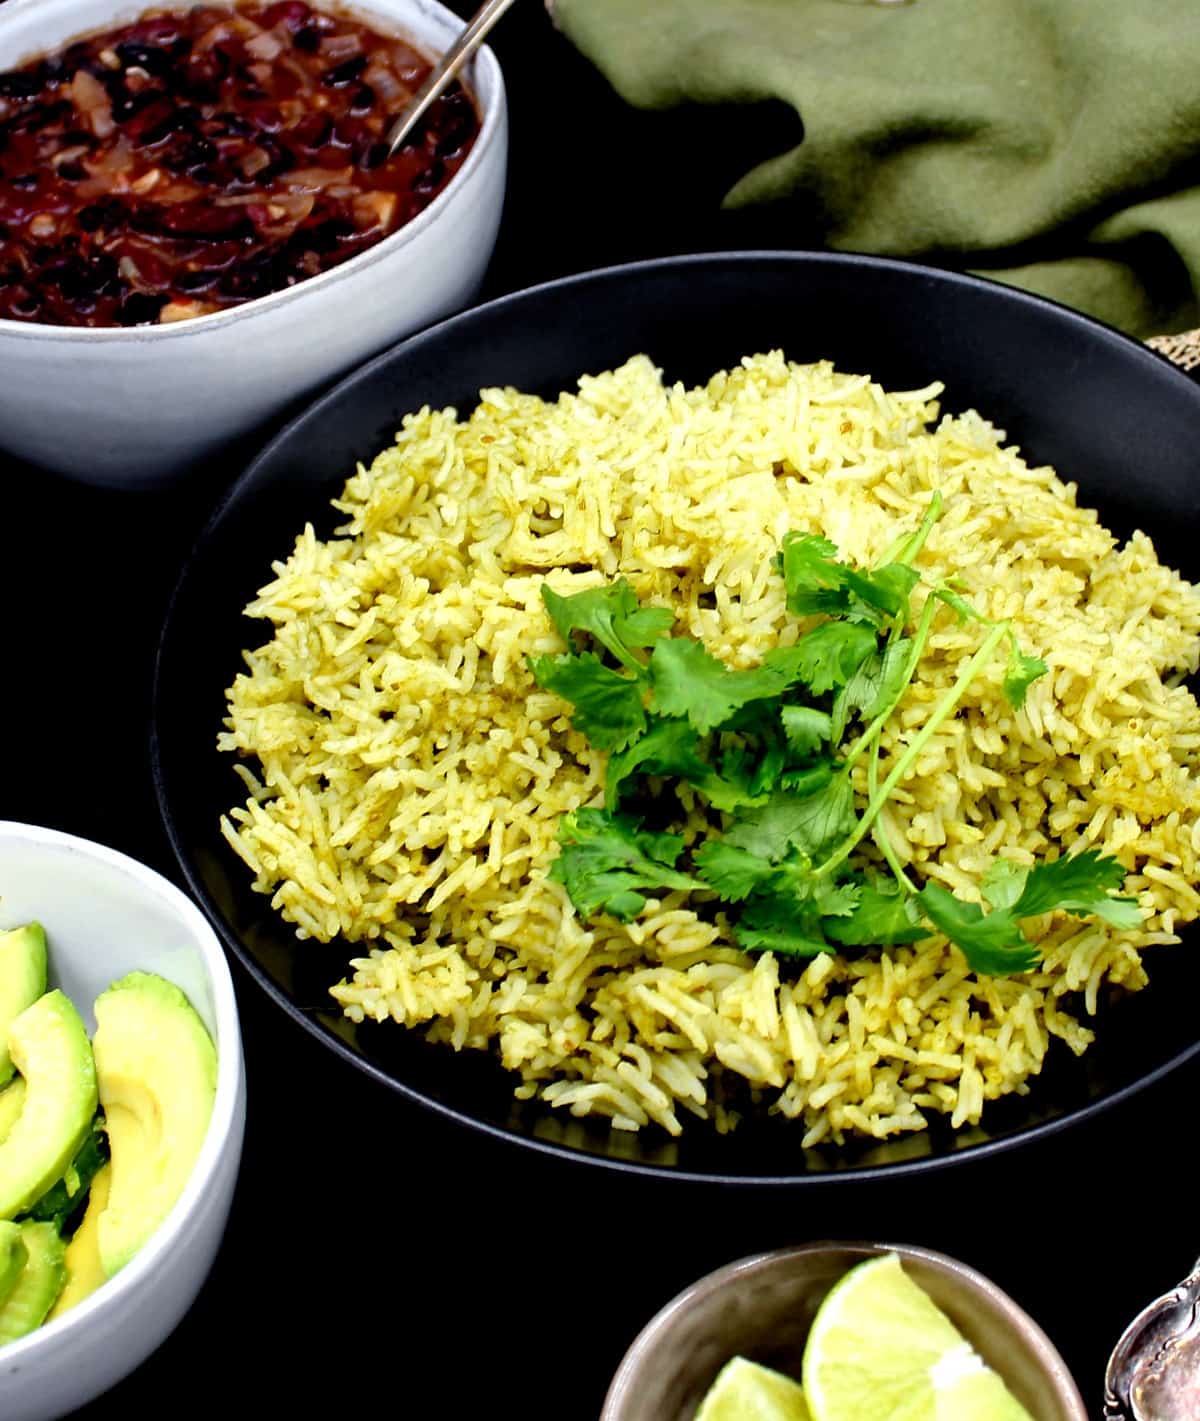 Front shot of a black bowl with Mexican green rice and cilantro, surrounded by small ceramic bowls with wedges of lime, avocado and refried beans, In the background is a green napkin with gold border, and all of it is on a black background.